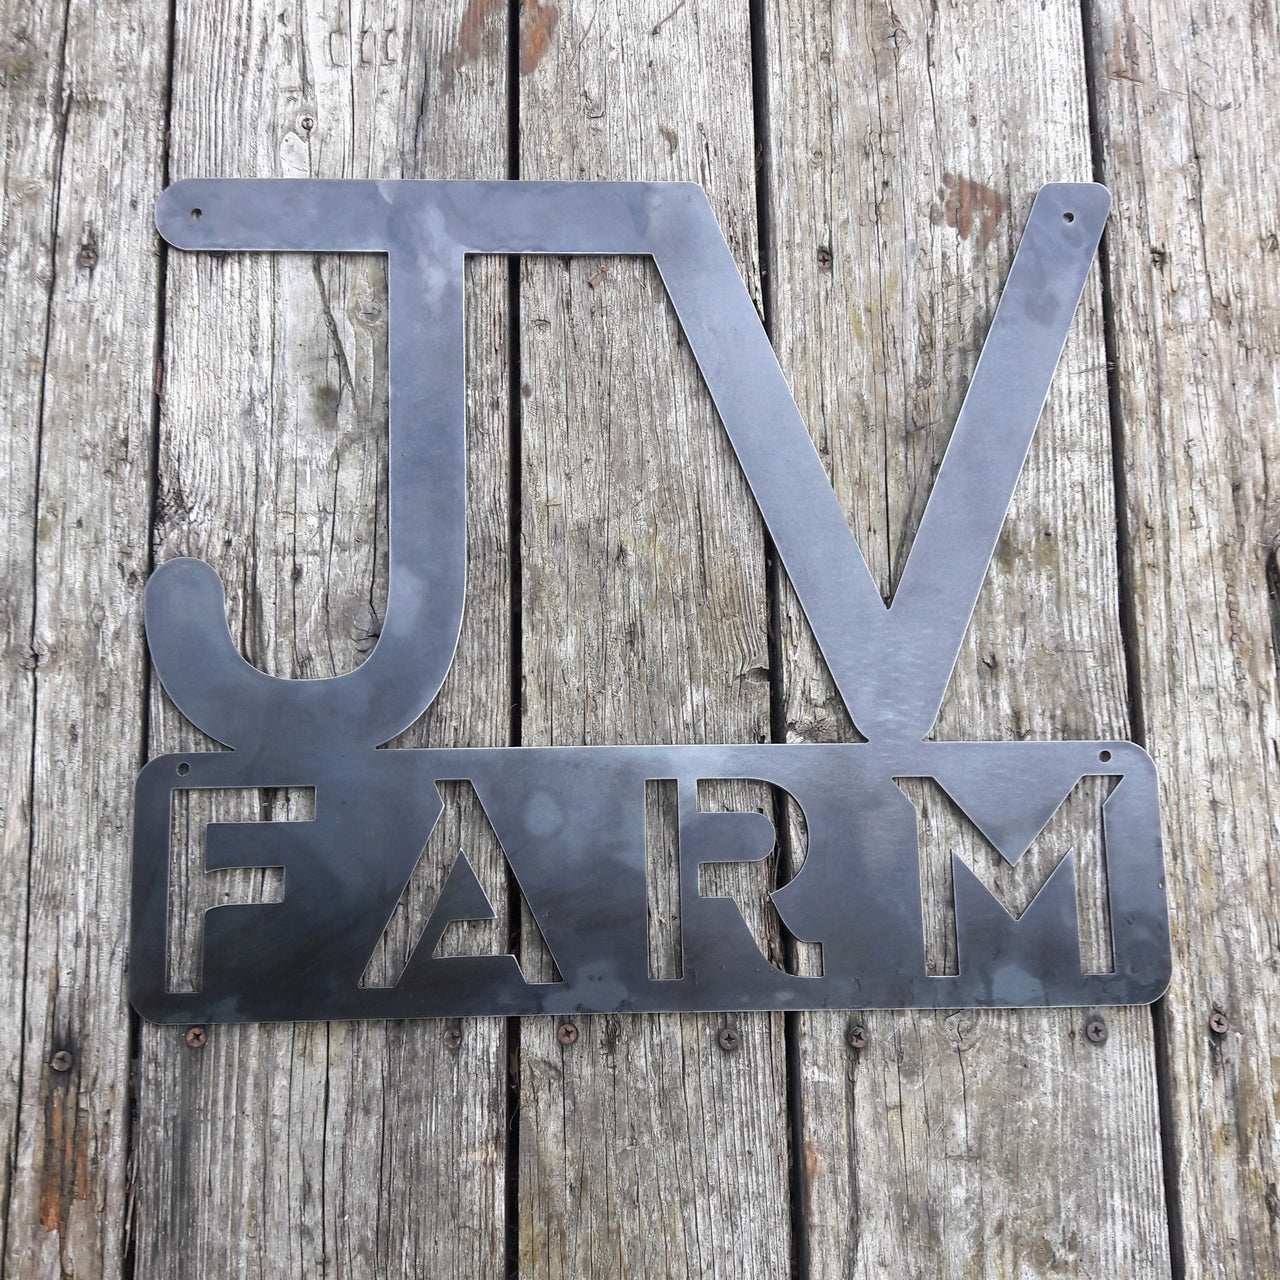 This metal sign has two initials at the top followed by a block of text. It reads, "JV Farm"